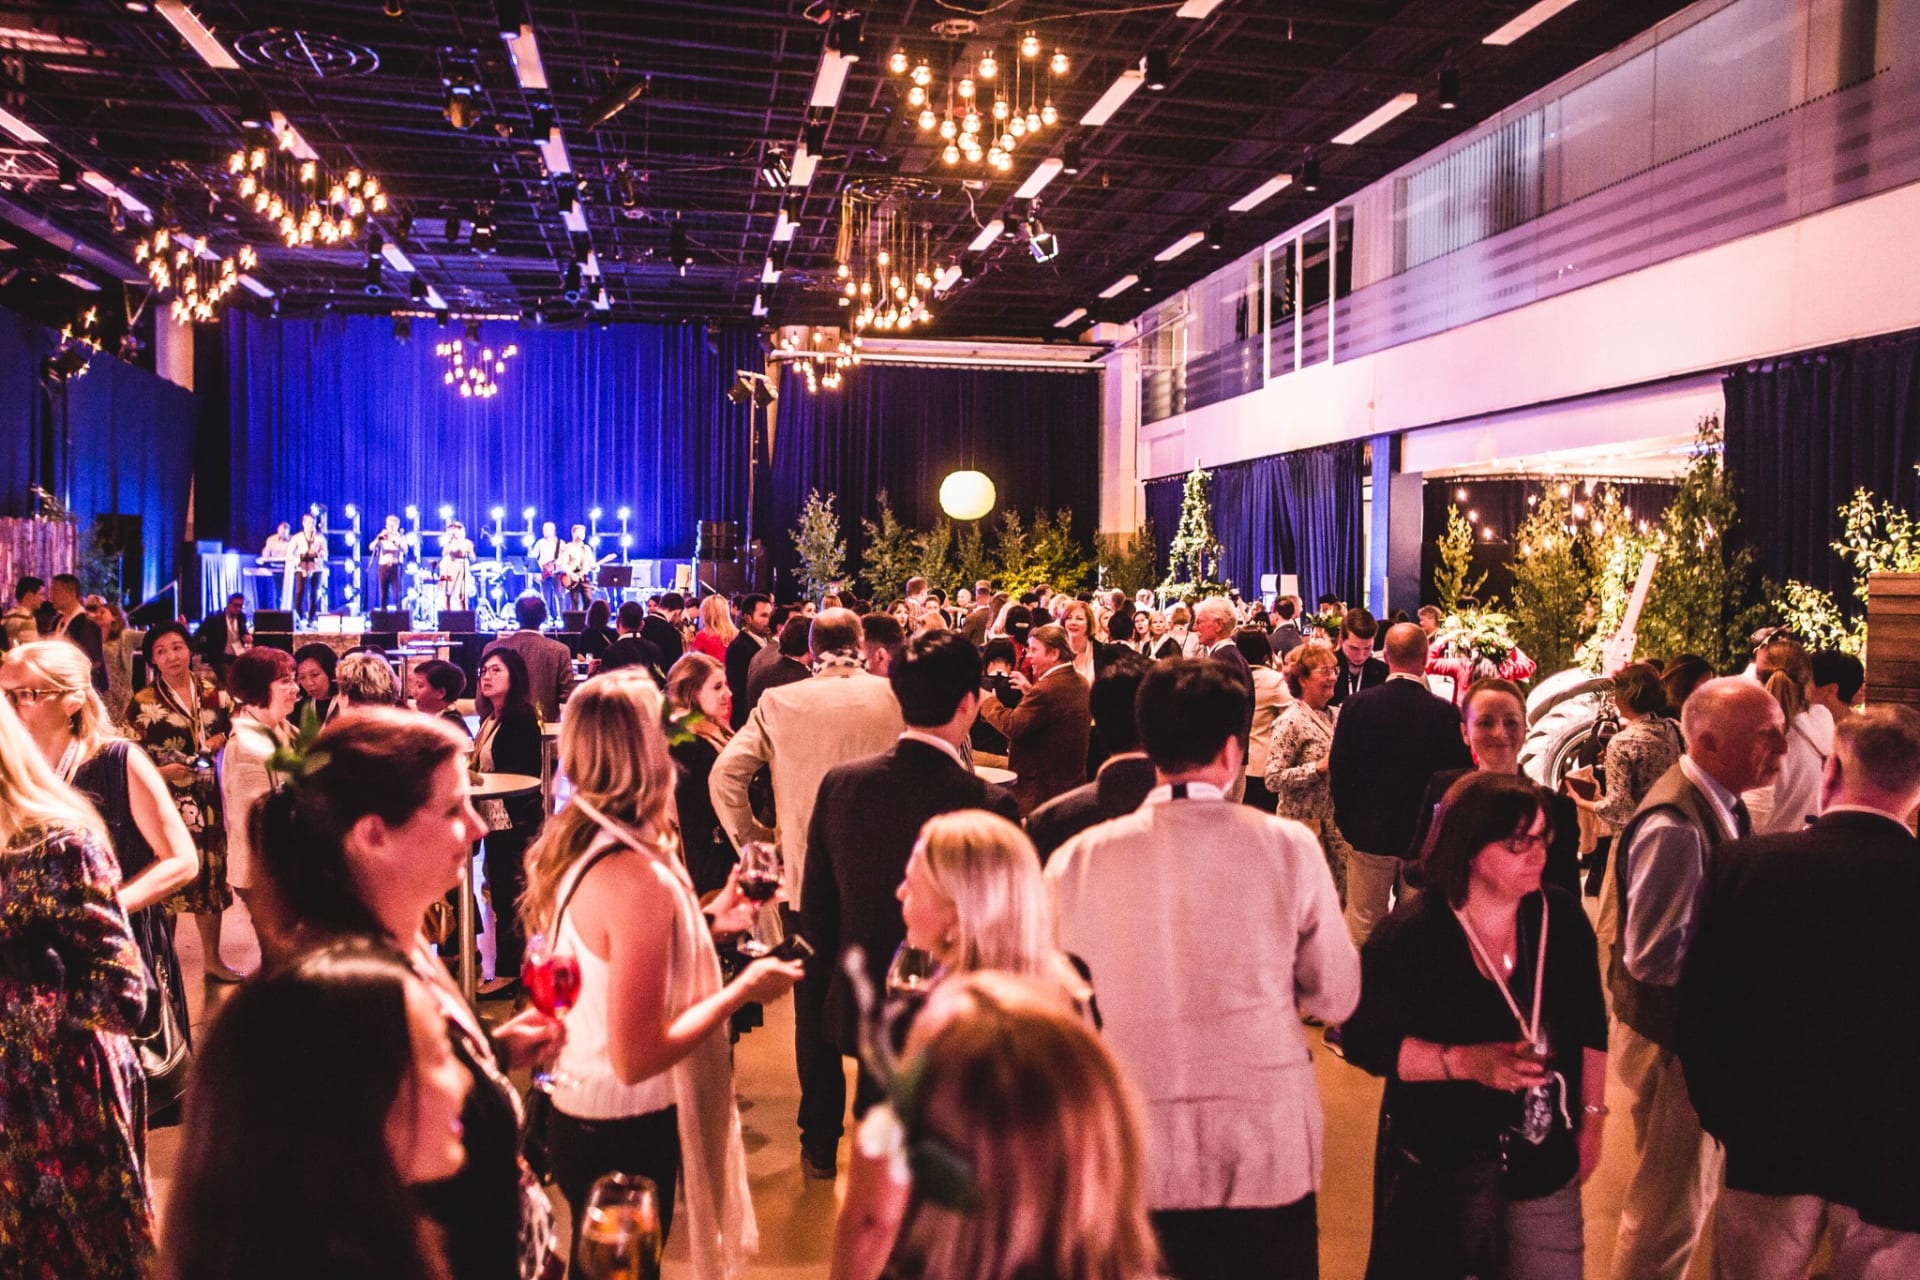 Tampere Hall offers versatile and adaptable spaces for events both big and small.